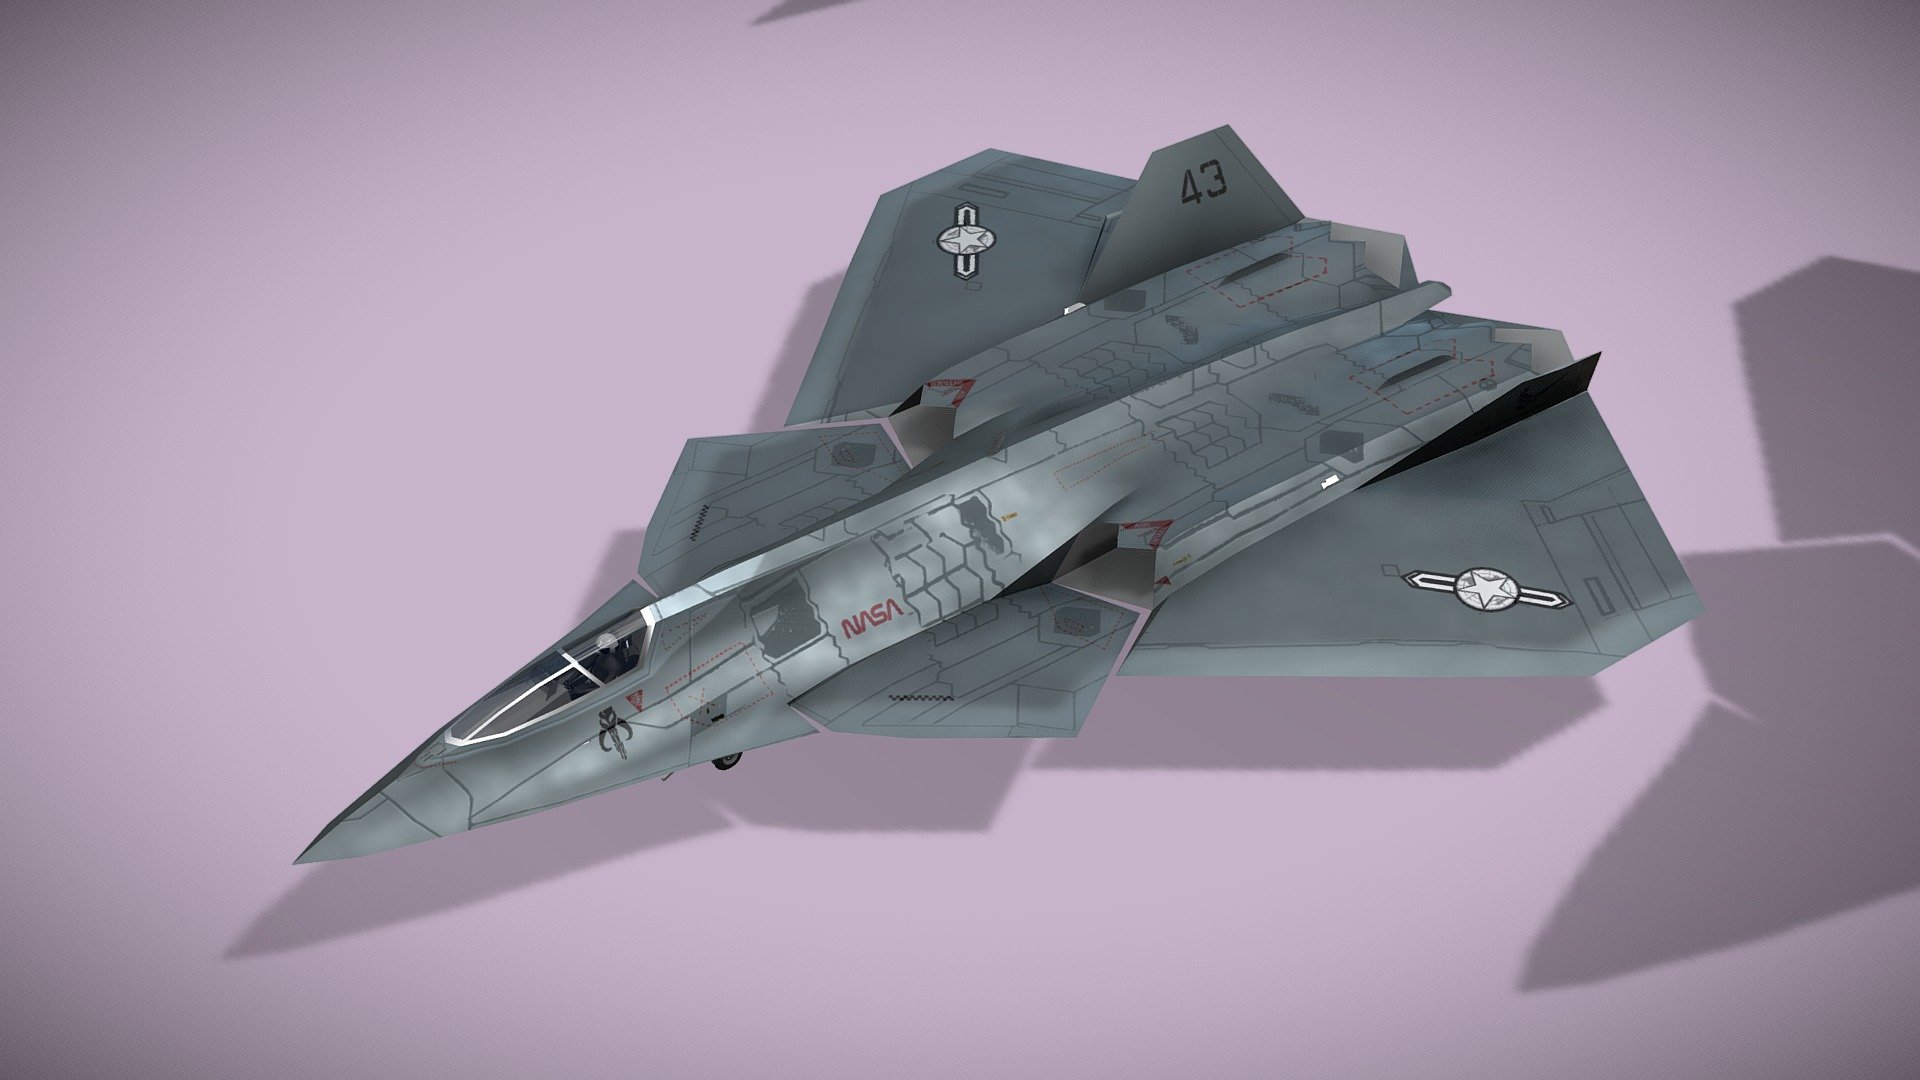 Lockheed NGAD prime

Lowpoly model of american concept supersonic 6th gen fighter + drone swarm



The Next Generation Air Dominance (NGAD) is a United States Air Force (USAF) sixth-generation fighter initiative with a goal of fielding a &ldquo;family of systems